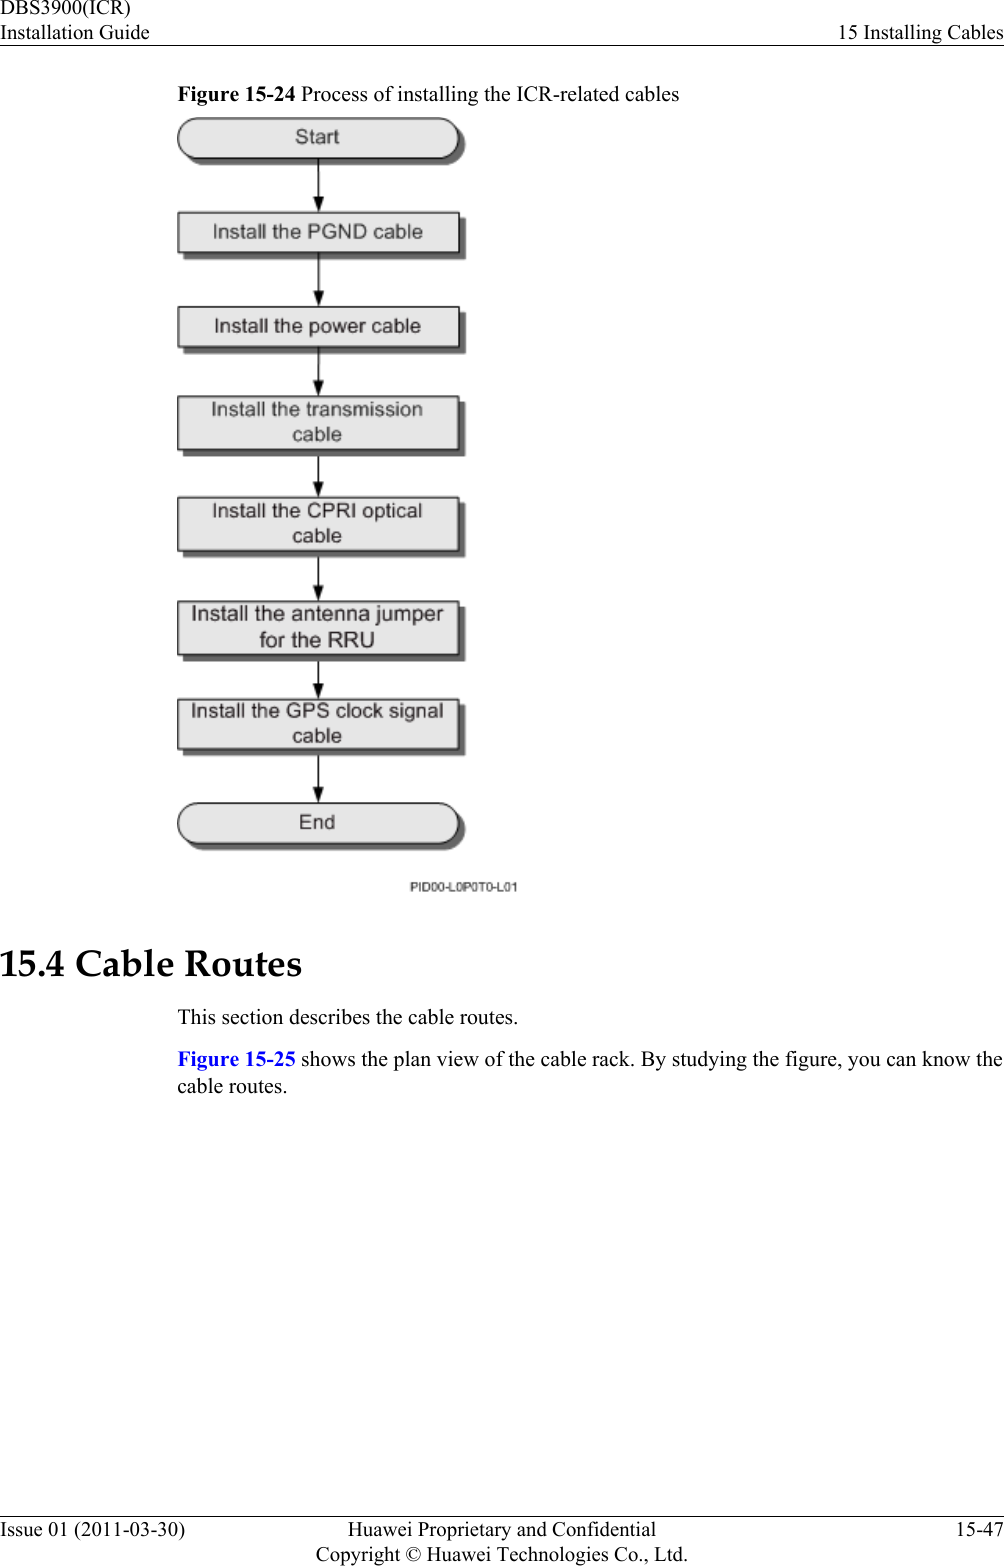 Figure 15-24 Process of installing the ICR-related cables15.4 Cable RoutesThis section describes the cable routes.Figure 15-25 shows the plan view of the cable rack. By studying the figure, you can know thecable routes.DBS3900(ICR)Installation Guide 15 Installing CablesIssue 01 (2011-03-30) Huawei Proprietary and ConfidentialCopyright © Huawei Technologies Co., Ltd.15-47